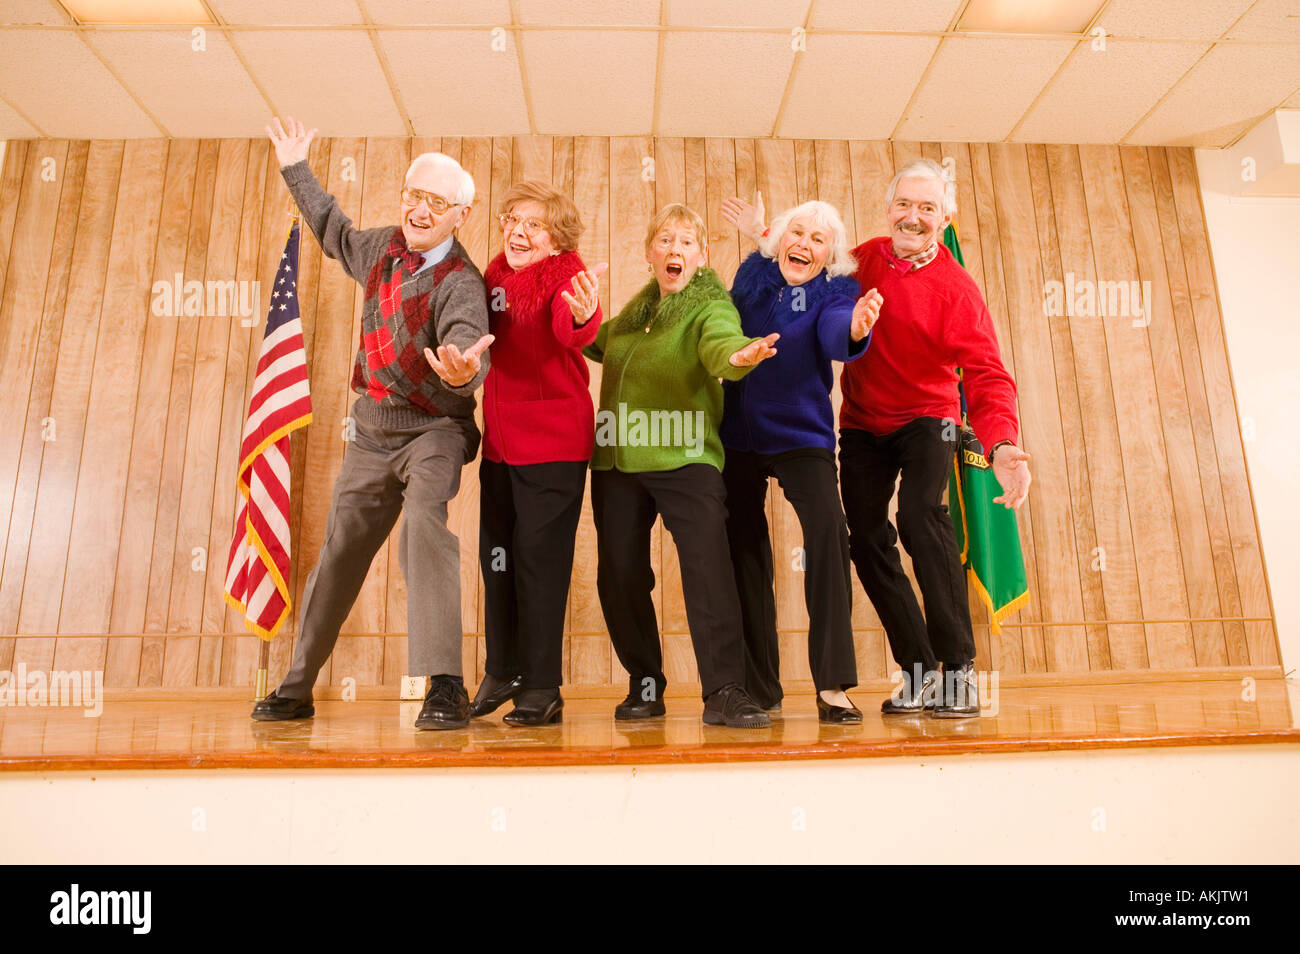 Elderly people performing song and dance Stock Photo